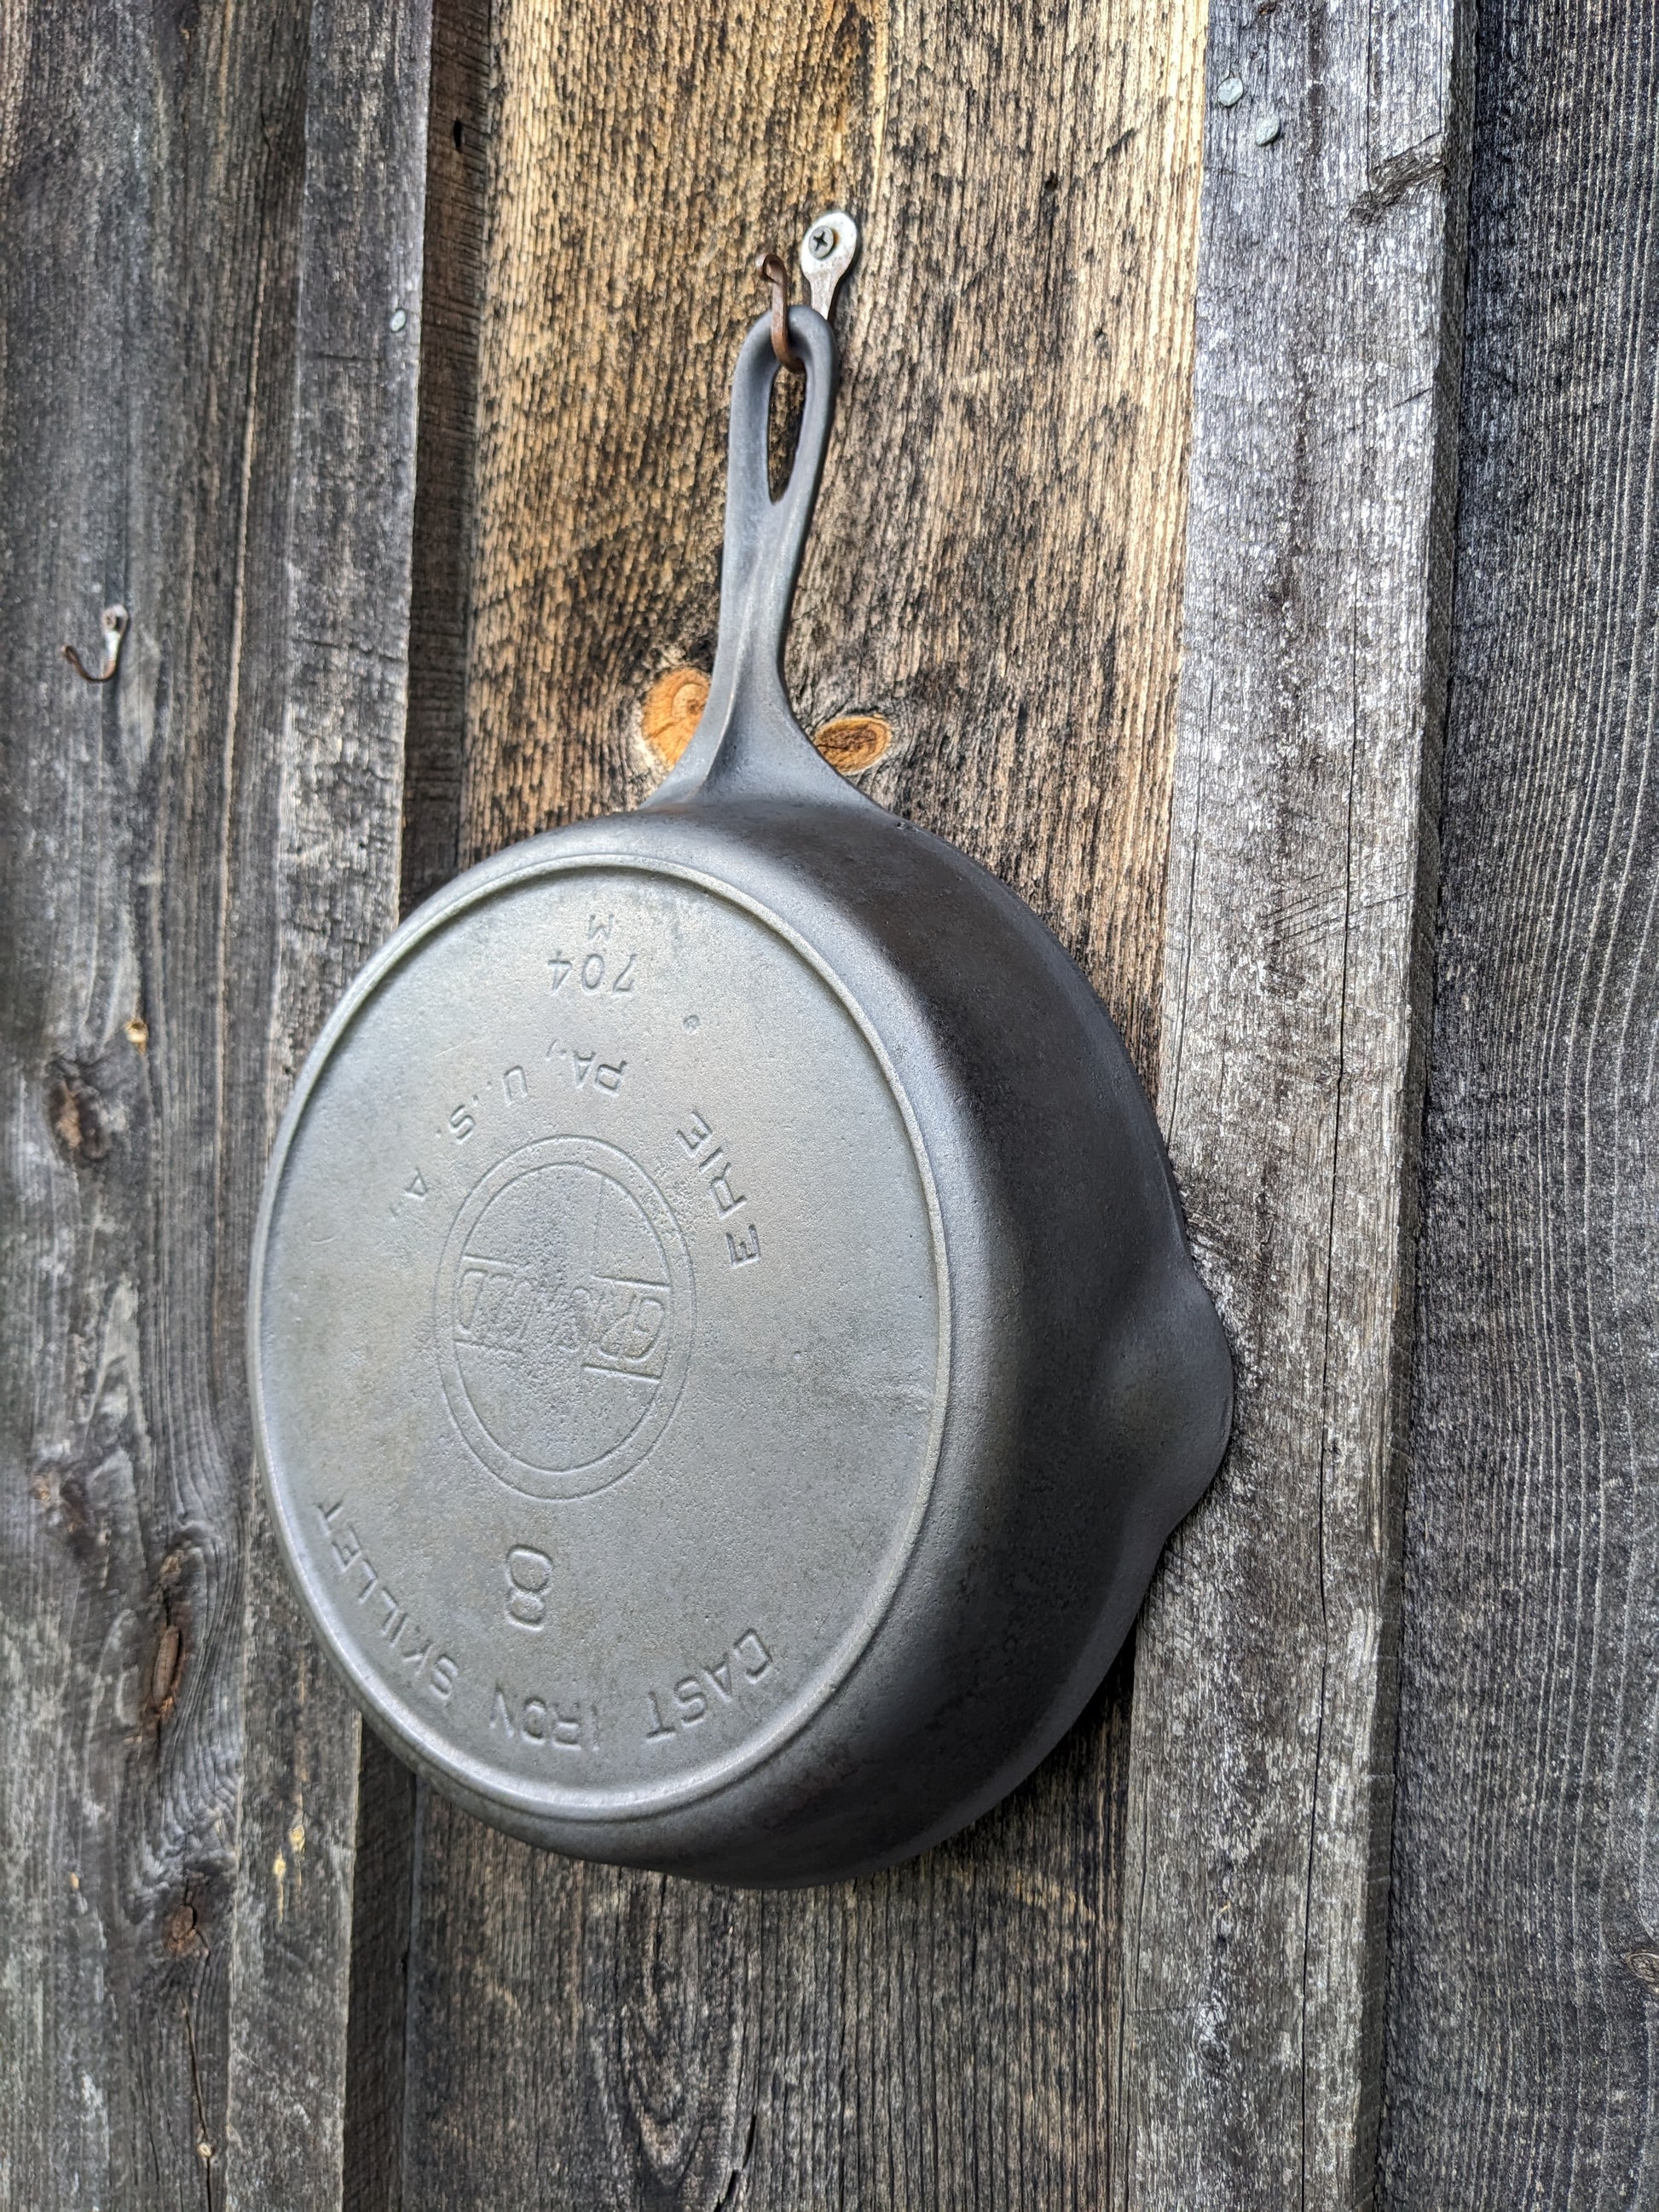 GRISWOLD No. 8 CAST IRON SKILLET 704 A Small Logo ERIE PA. 1939 - 1944